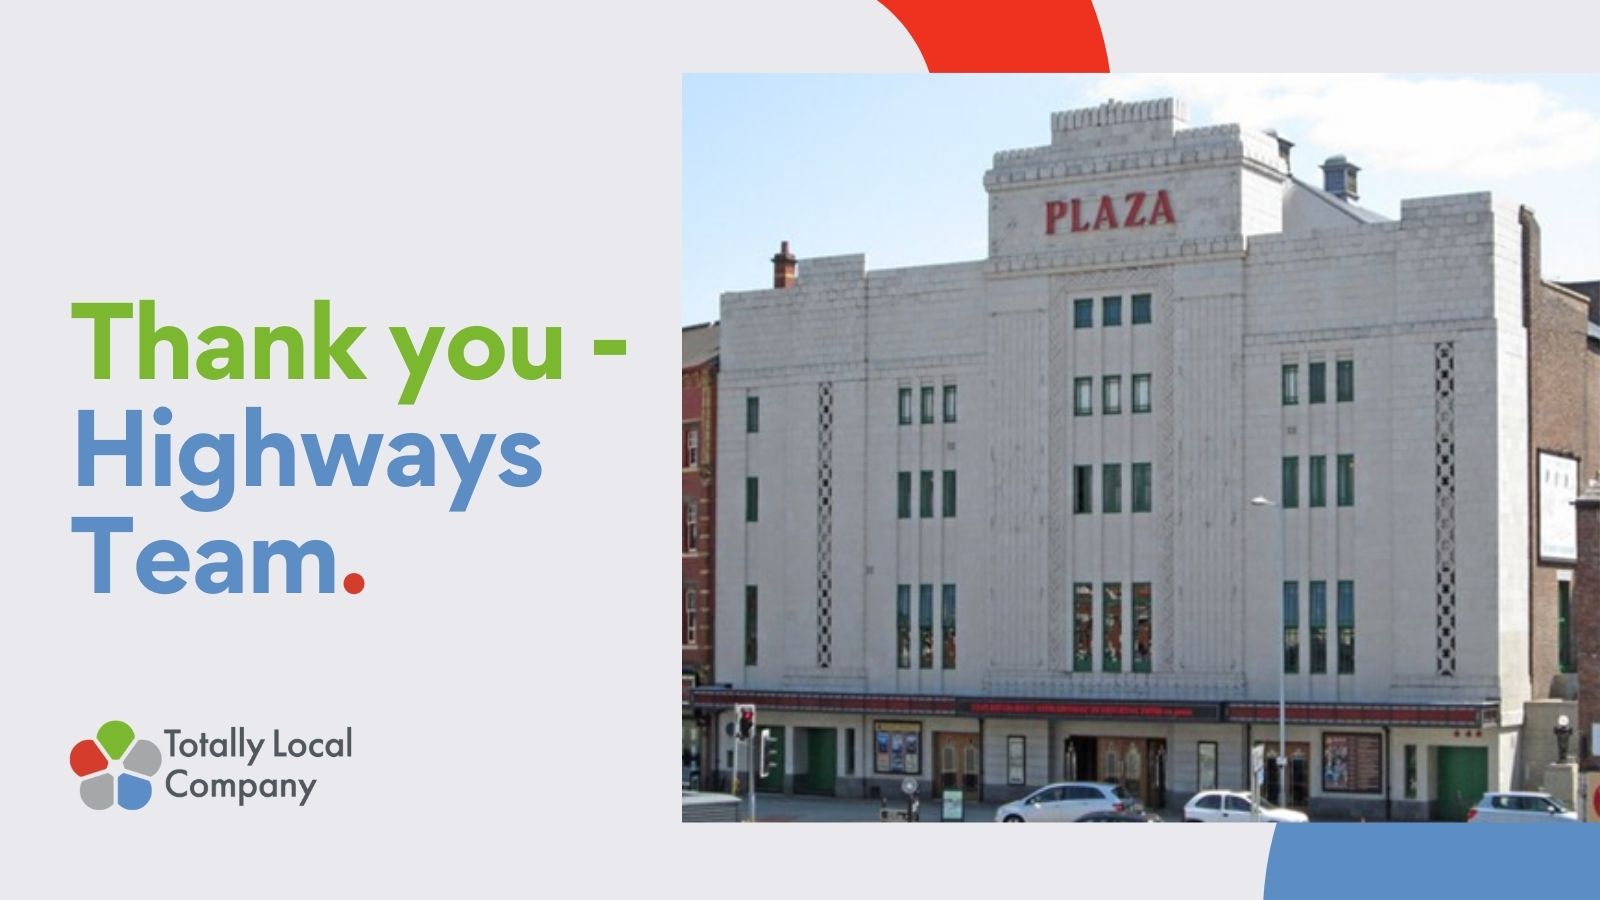 wording - thank you highways team, image of the stockport plaza - a historical theatre